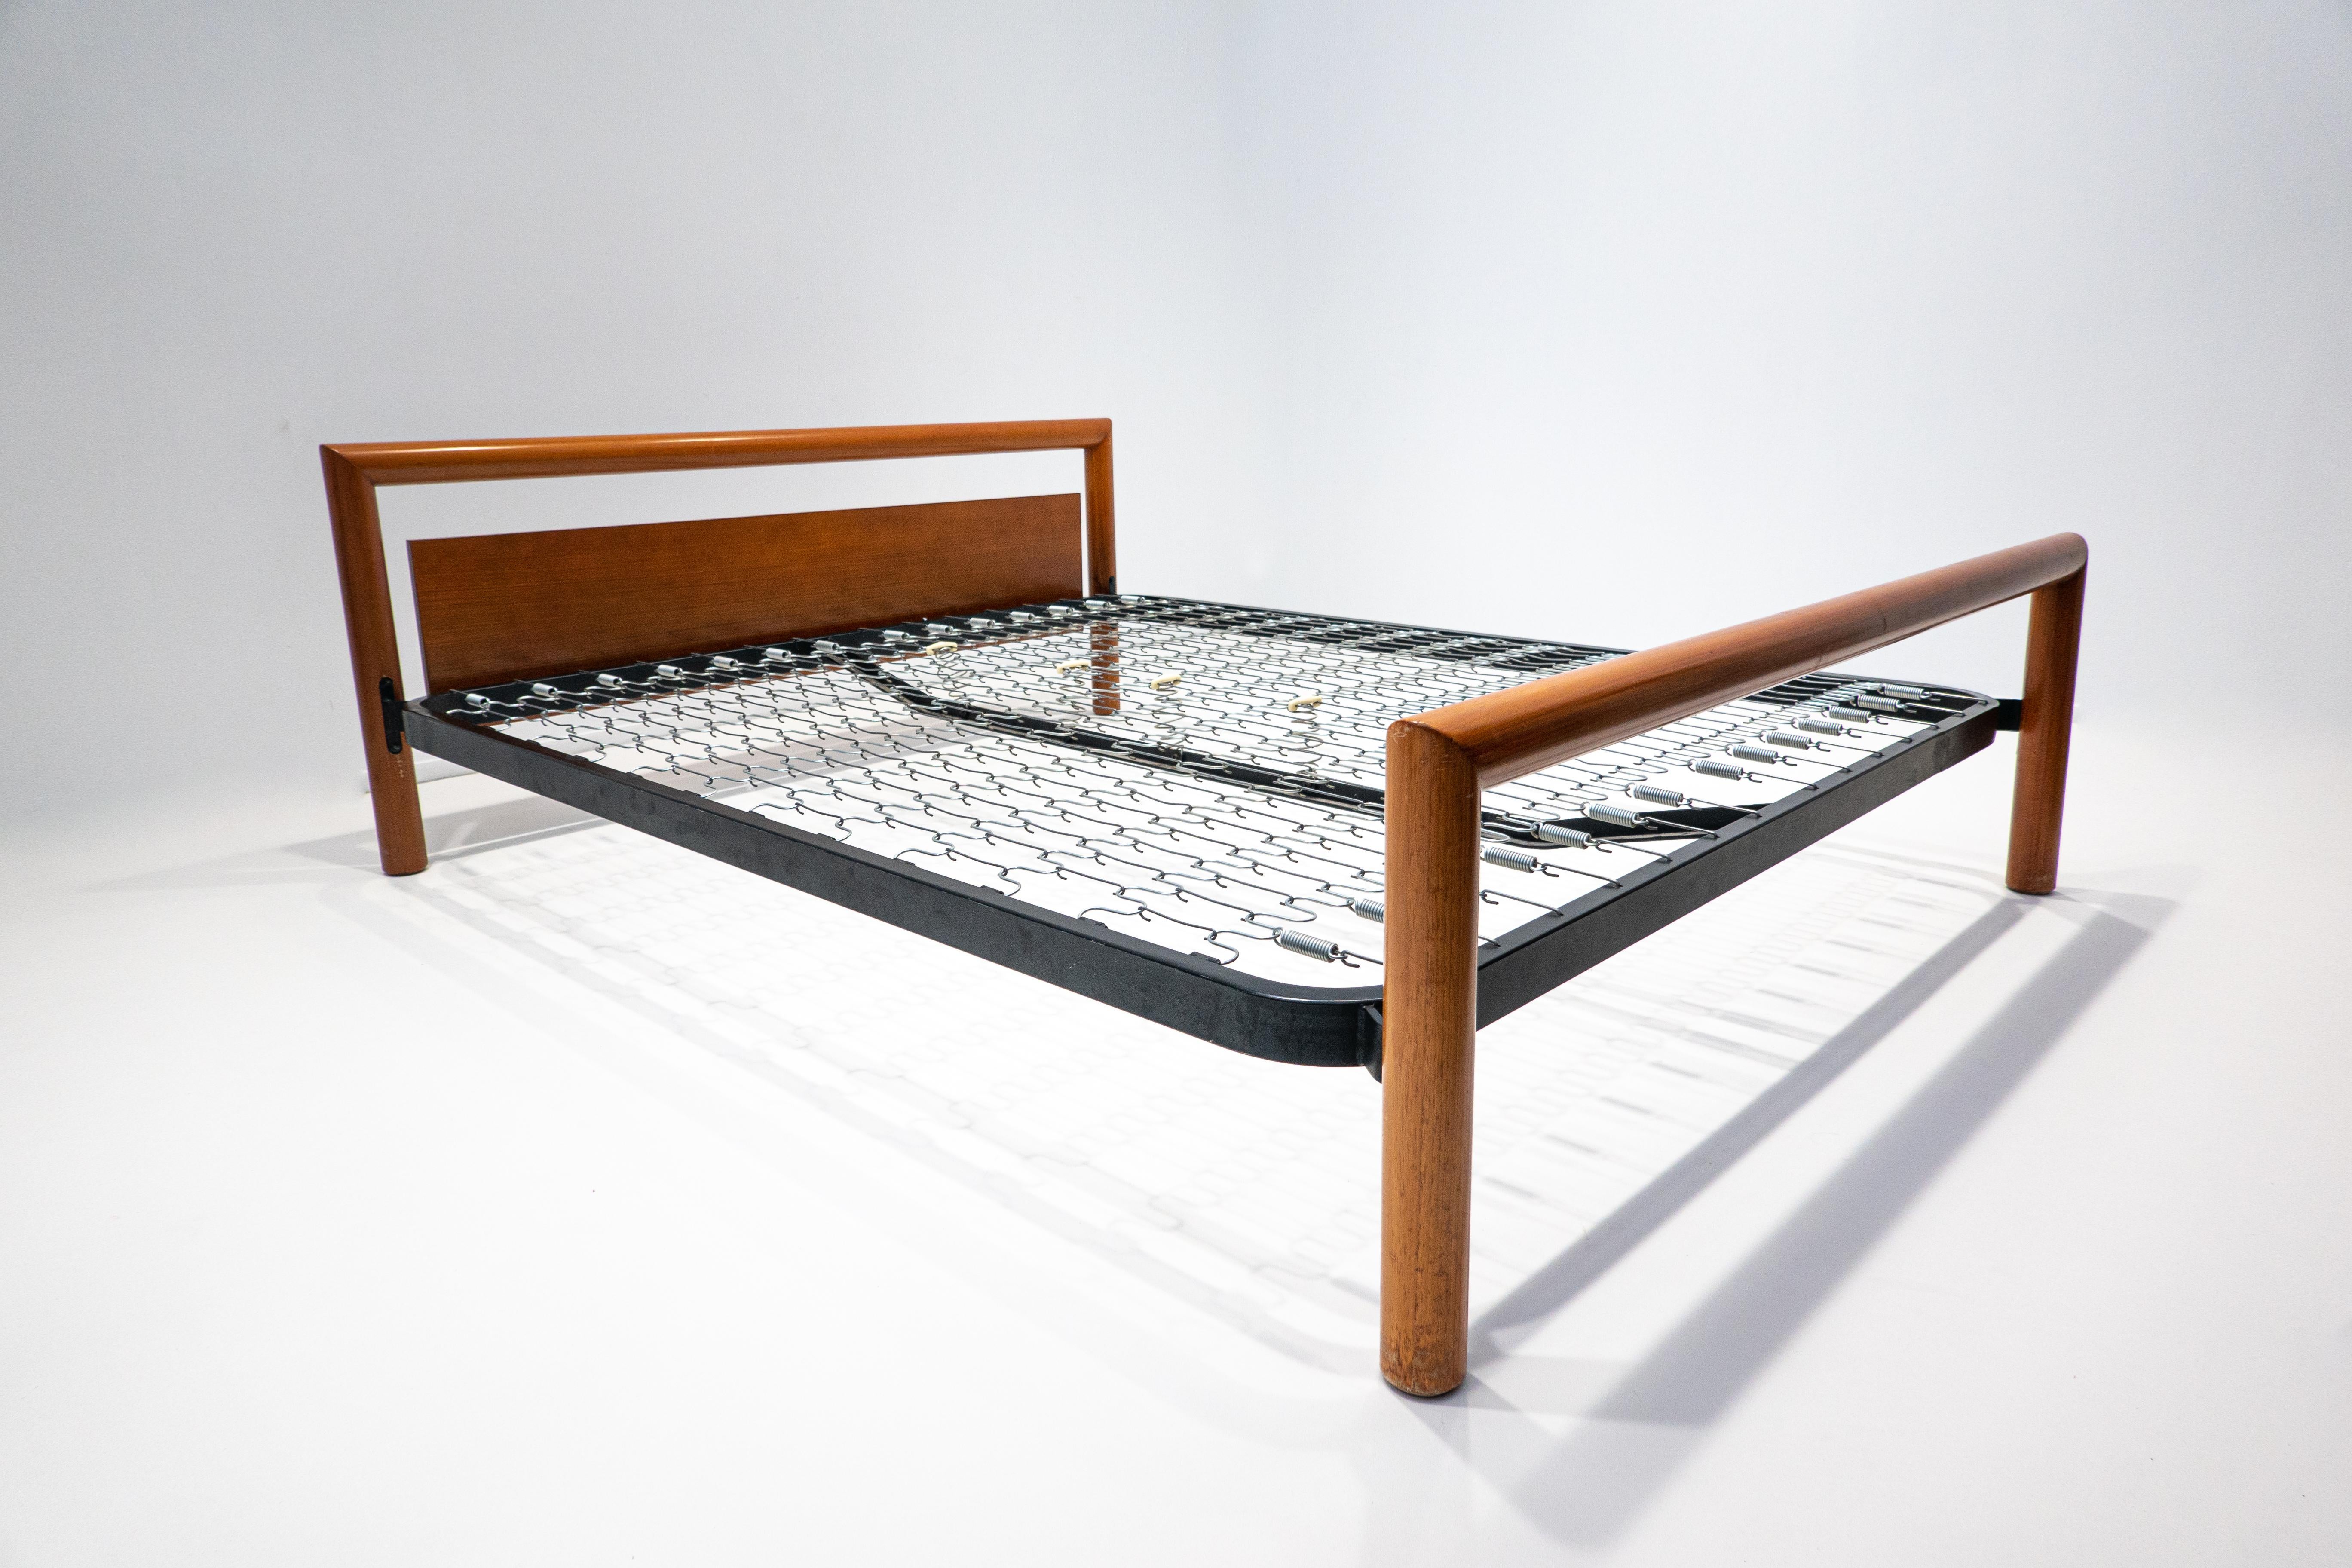 Mid-Century Modern wooden bed L108 by Eugenio Gerli for Tecno, 1960s.